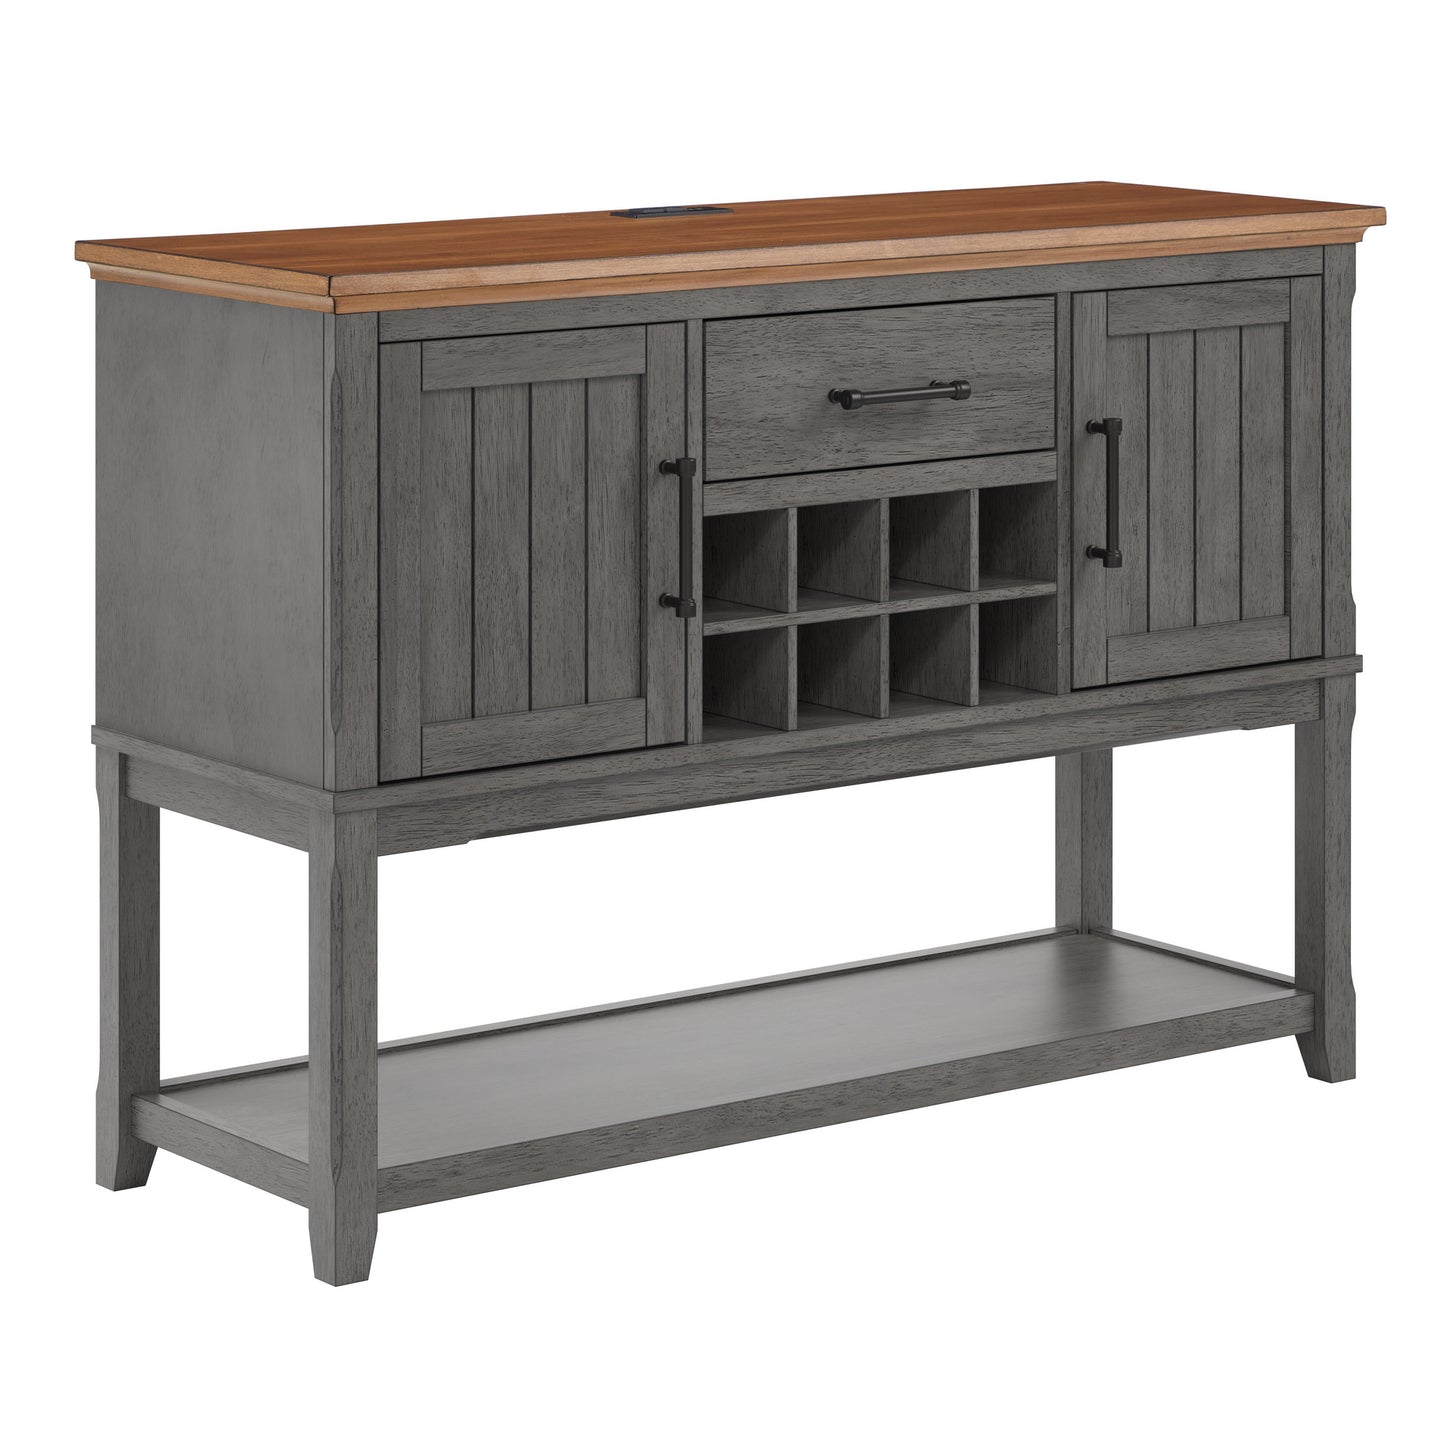 51" Wide Dining Hutch with Power Outlets